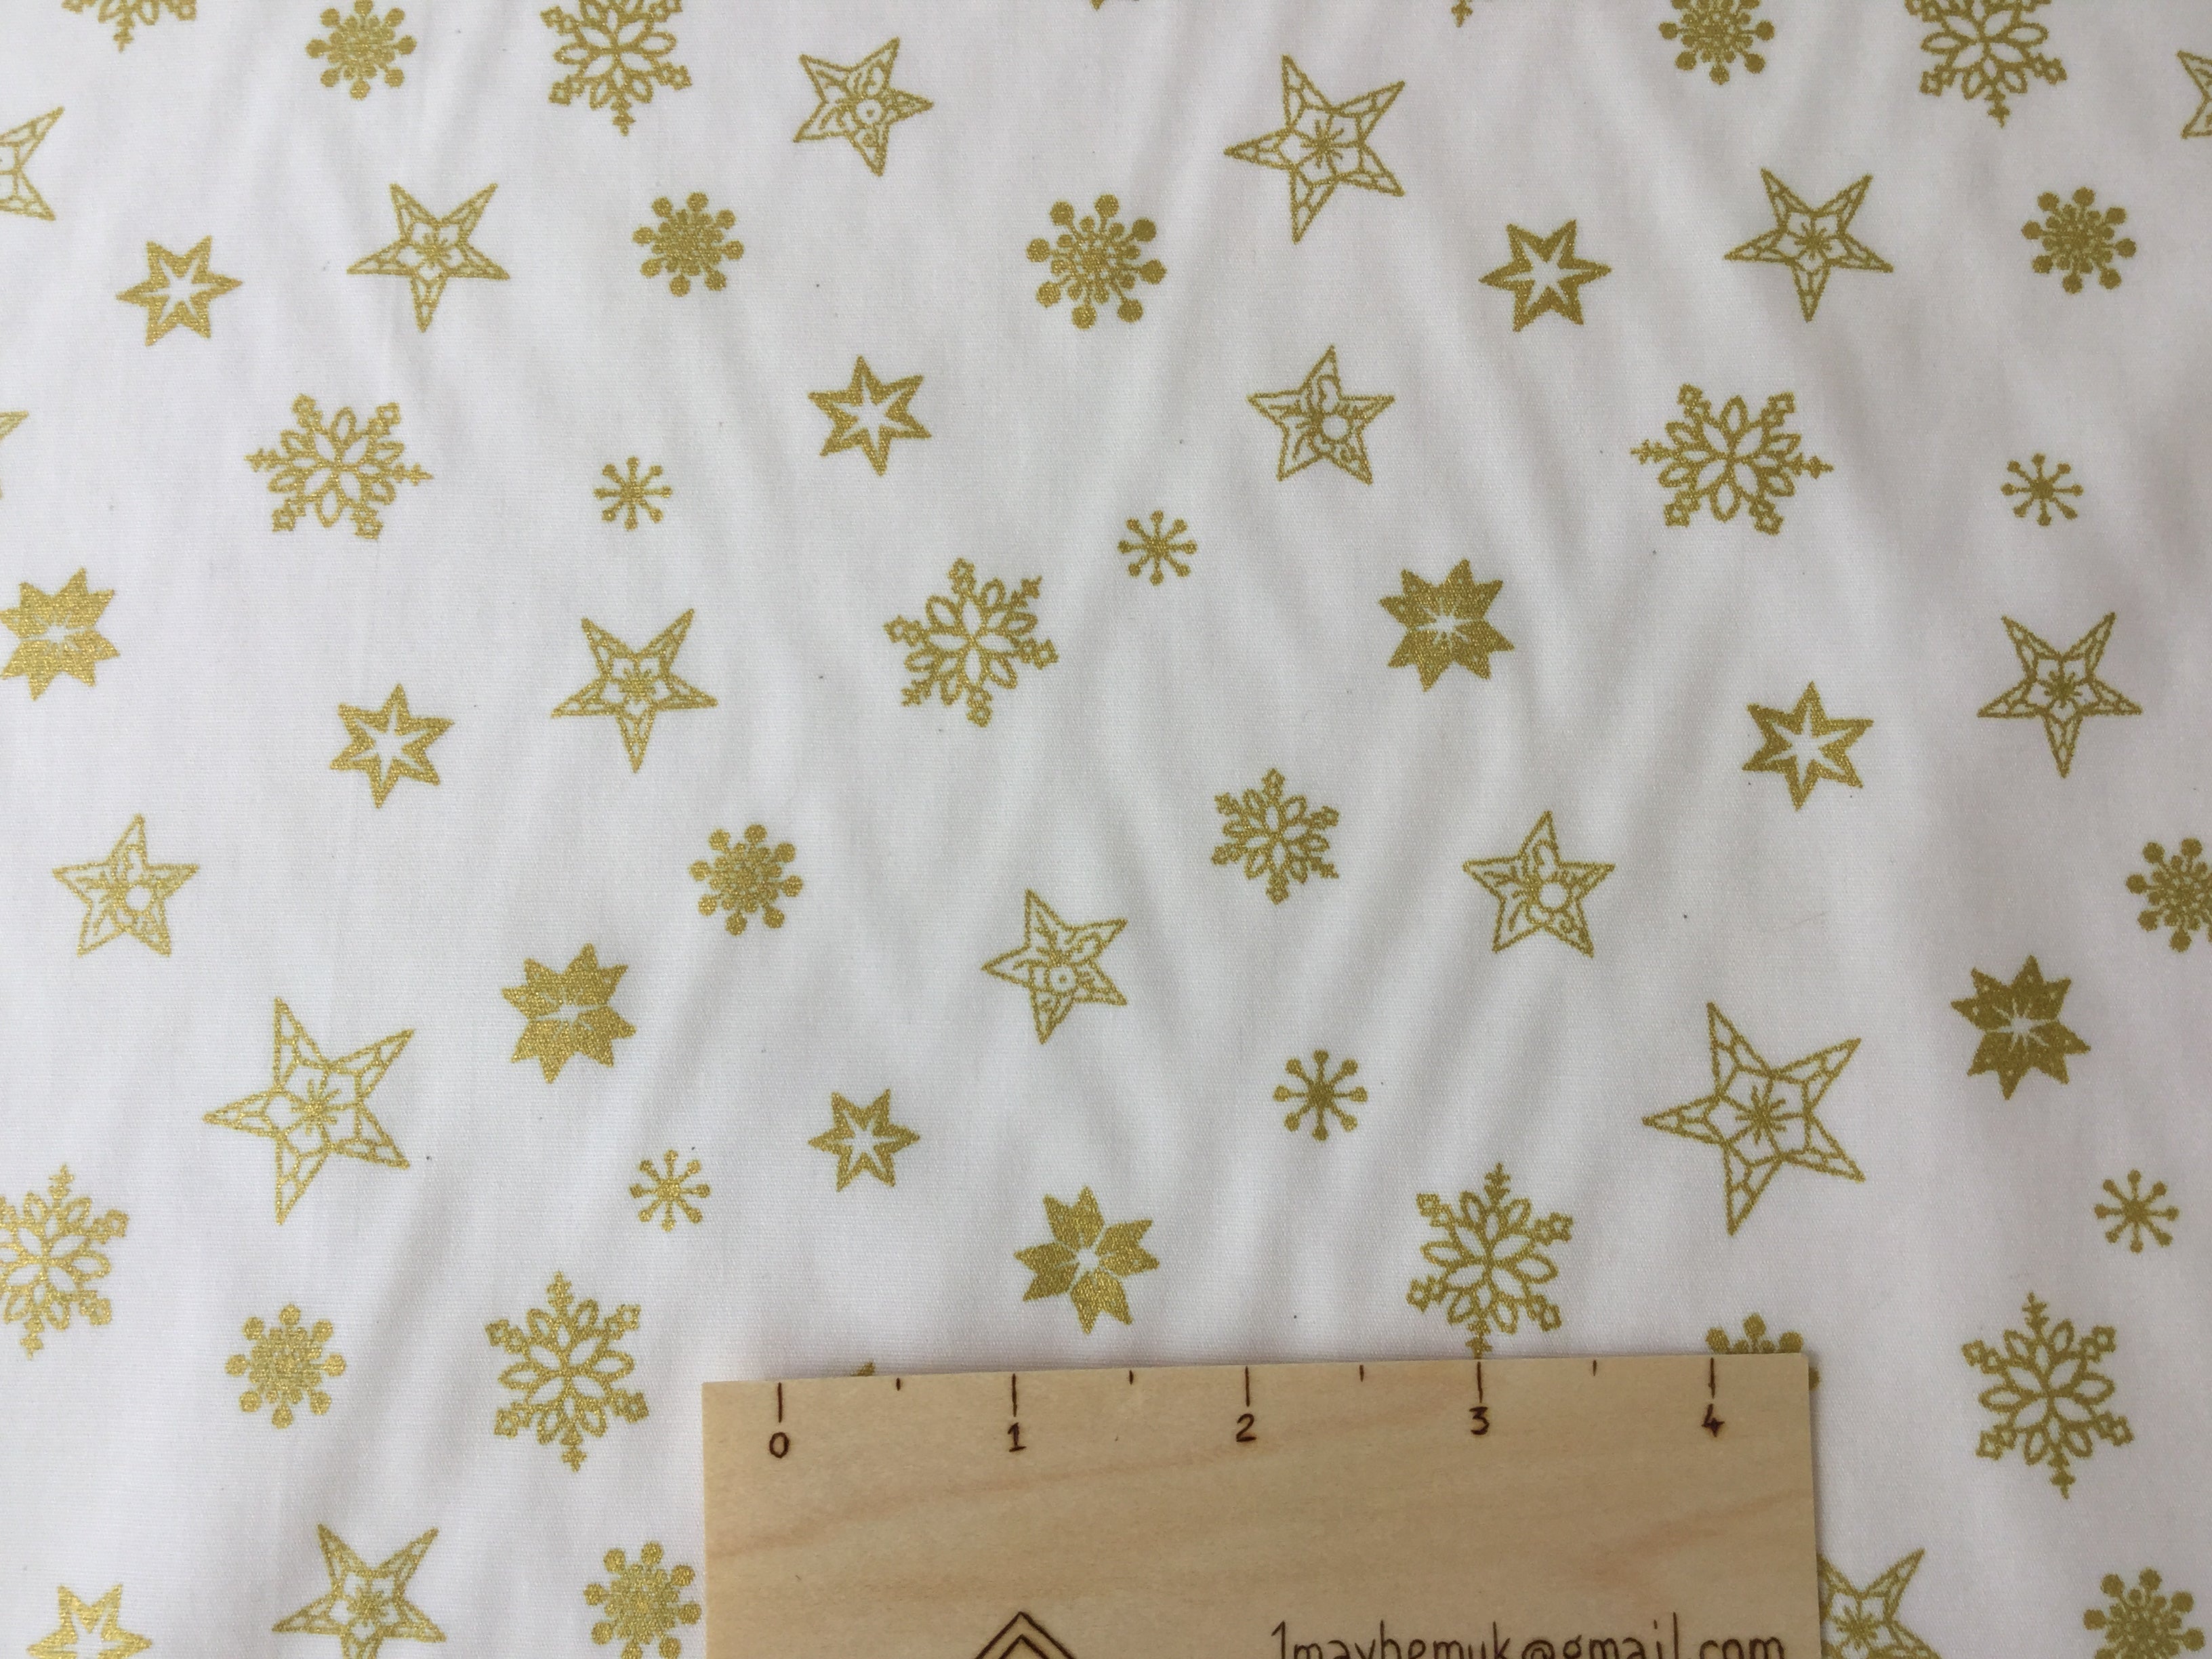 Rose and hubble gold stars cotton fabric with a festive theme